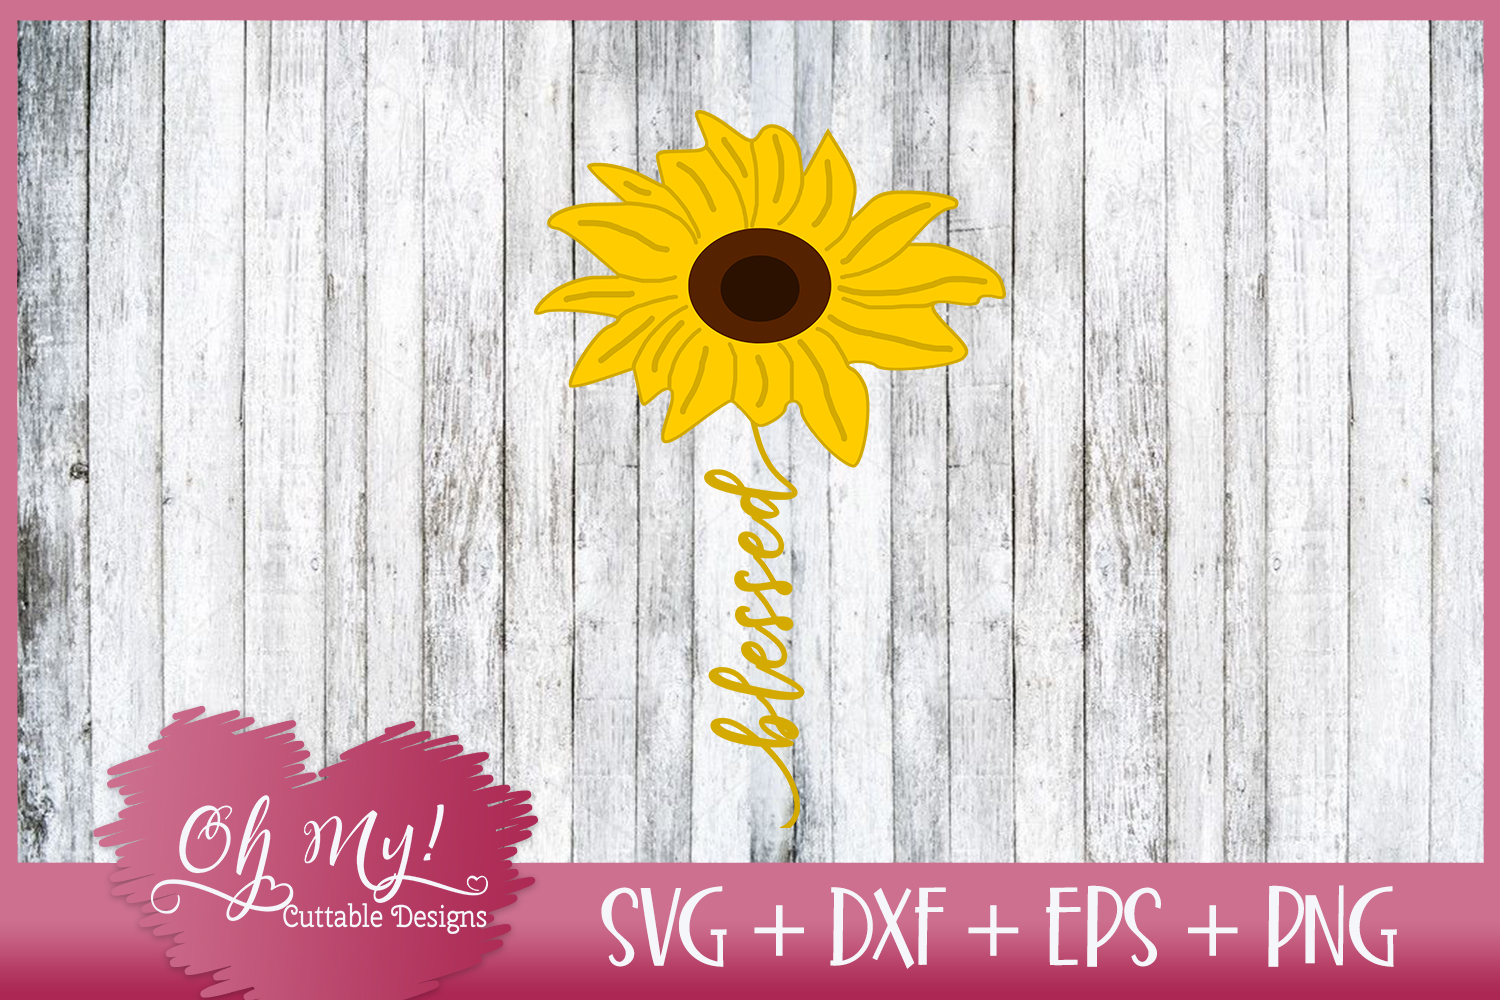 Blessed Sunflower - SVG EPS DXF PNG Cutting File (245873 ...